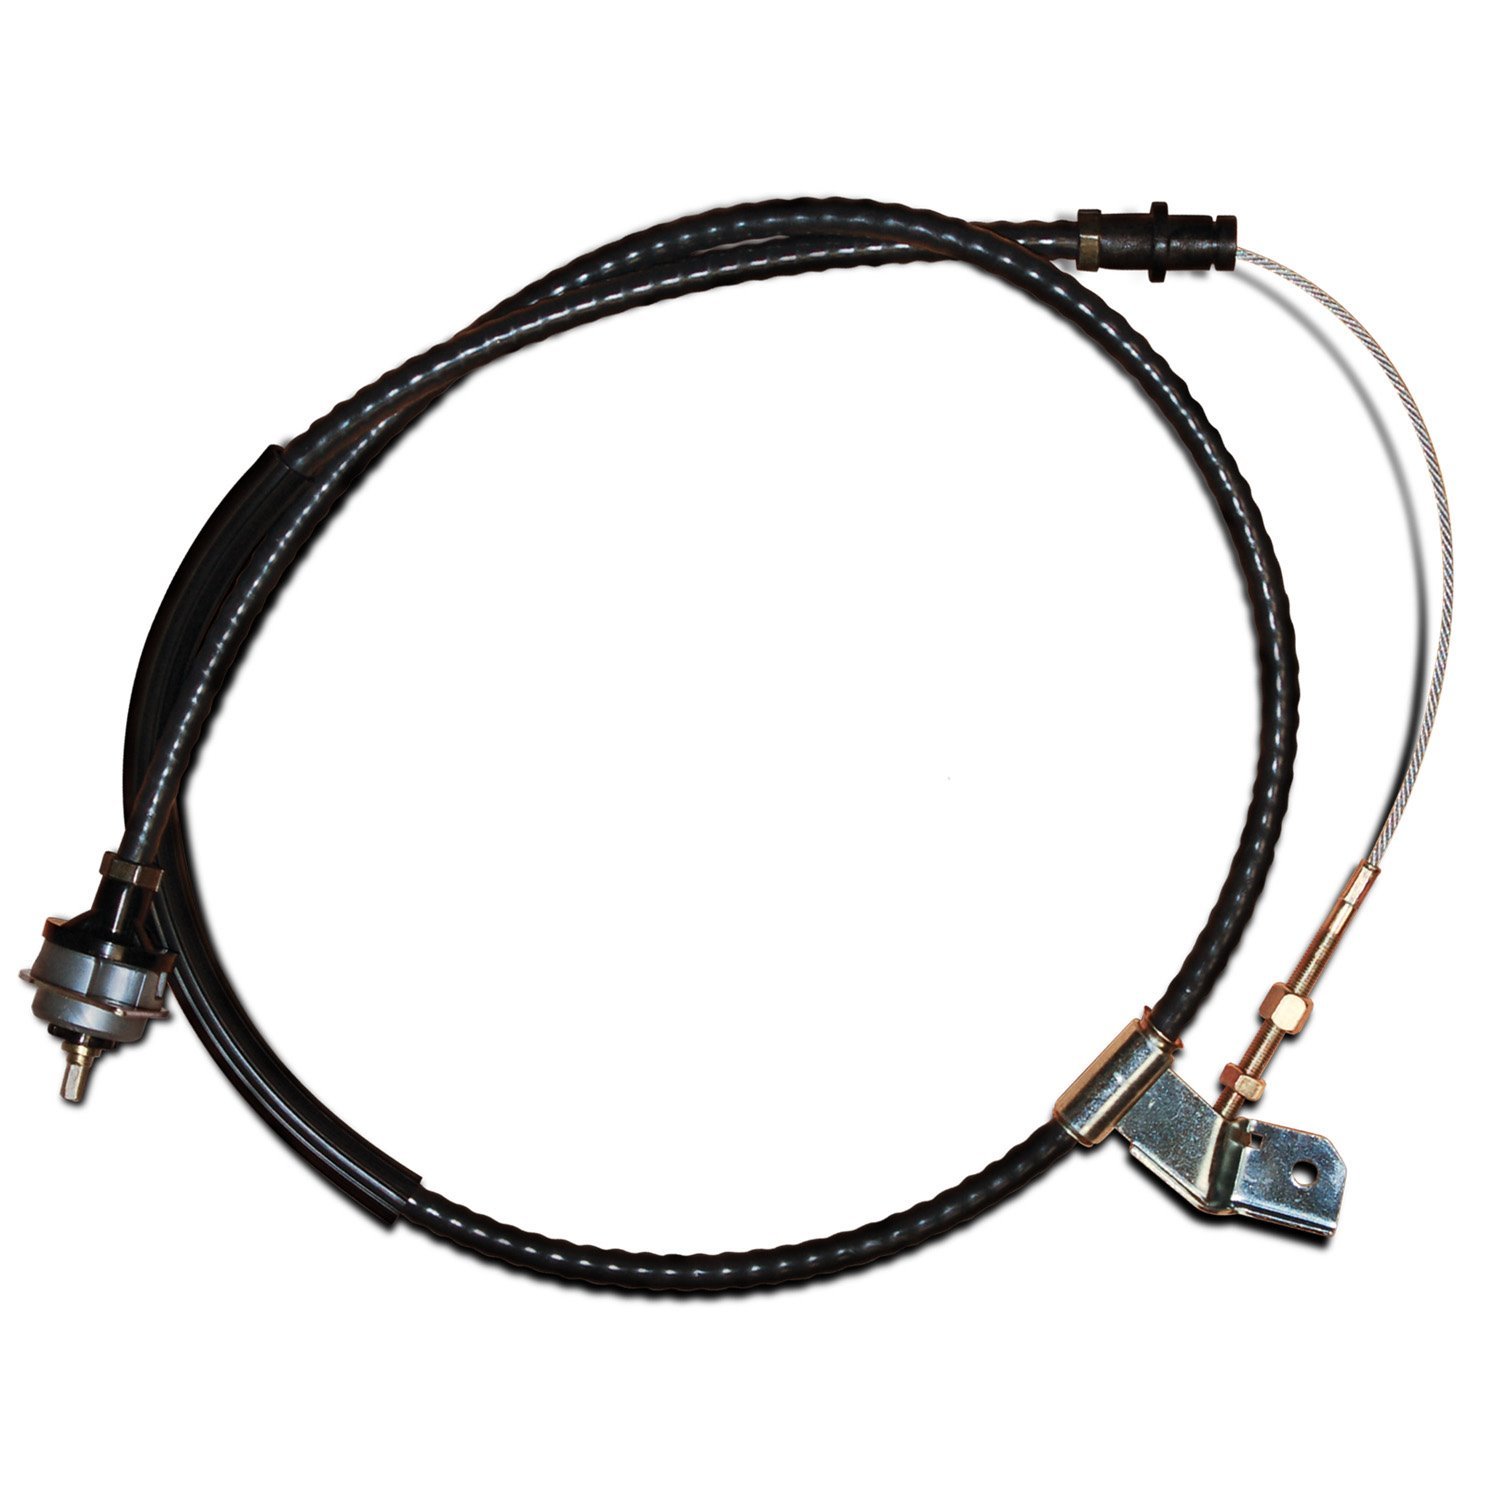 Adjustable Clutch Cable 1979-95 Ford Mustang GT/Cobra